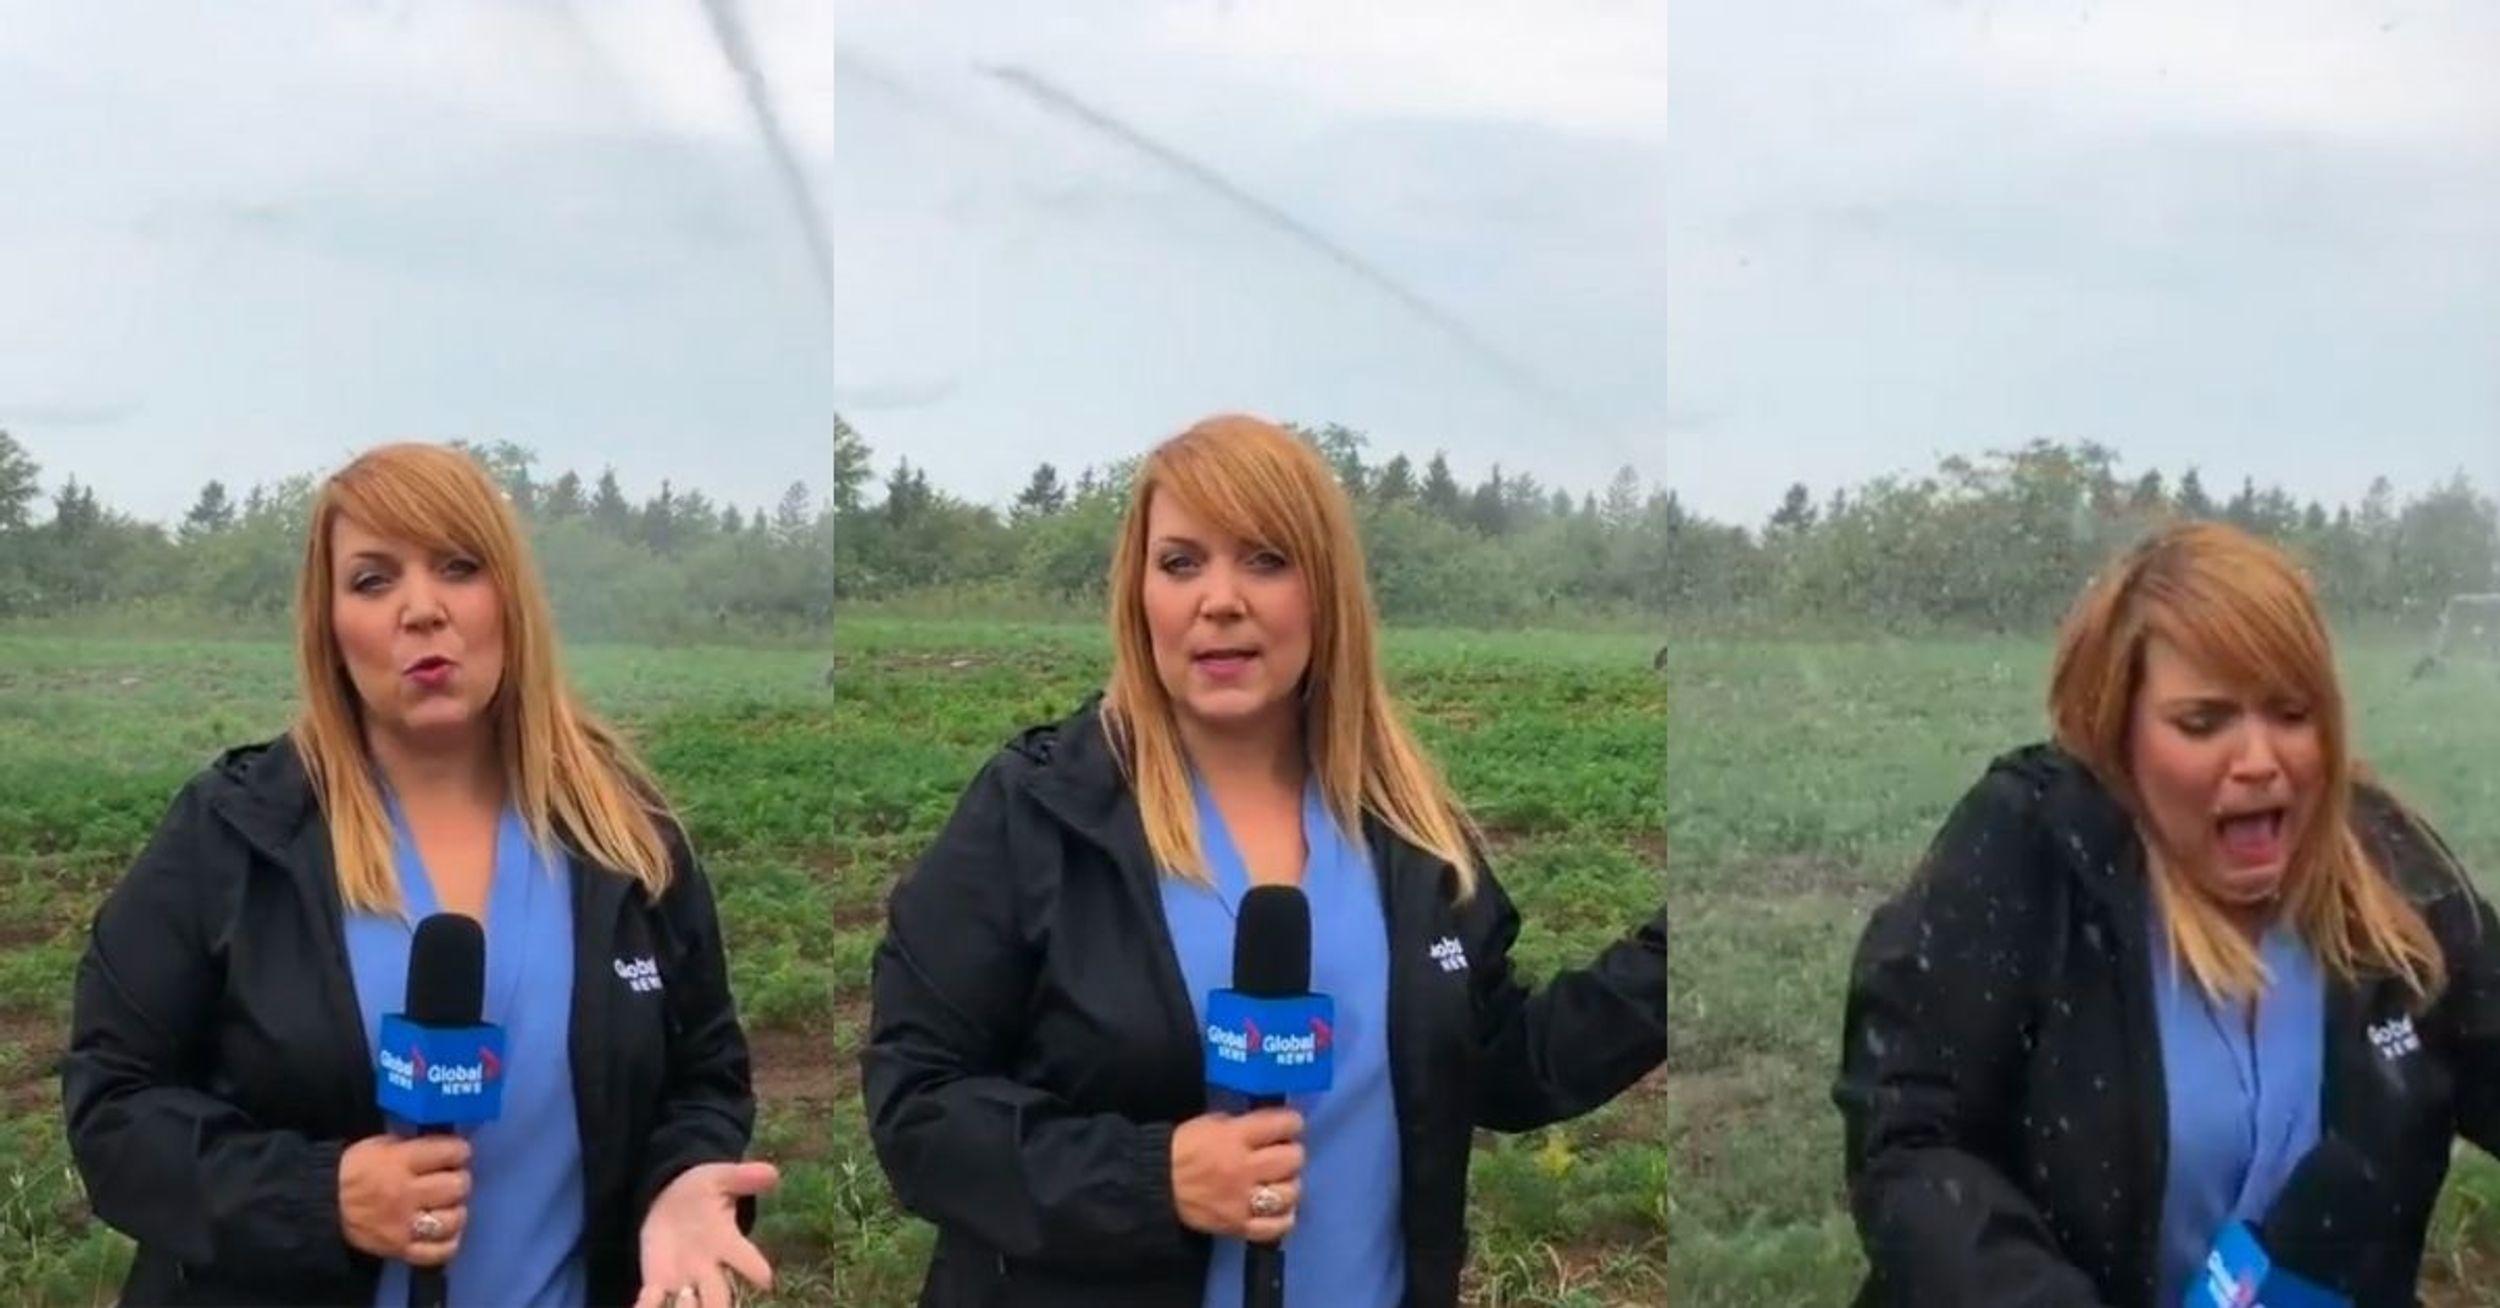 Reporter Gets A Hilariously Wet Surprise After Not Realizing She's In The Direct Path Of A Sprinkler